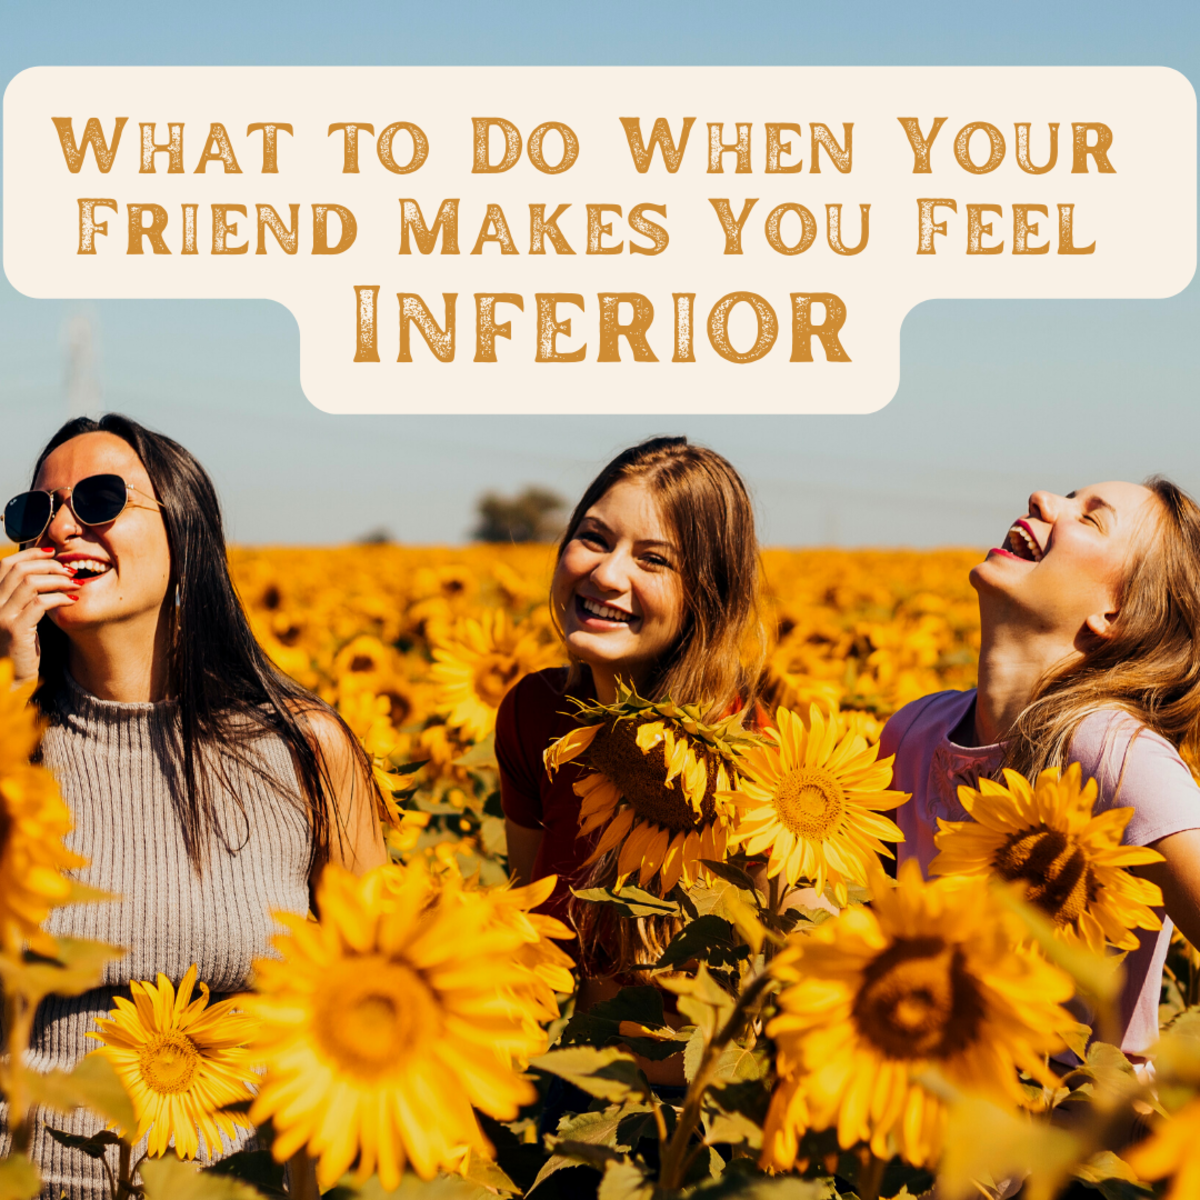 Why Does My Friend Make Me Feel Inferior?